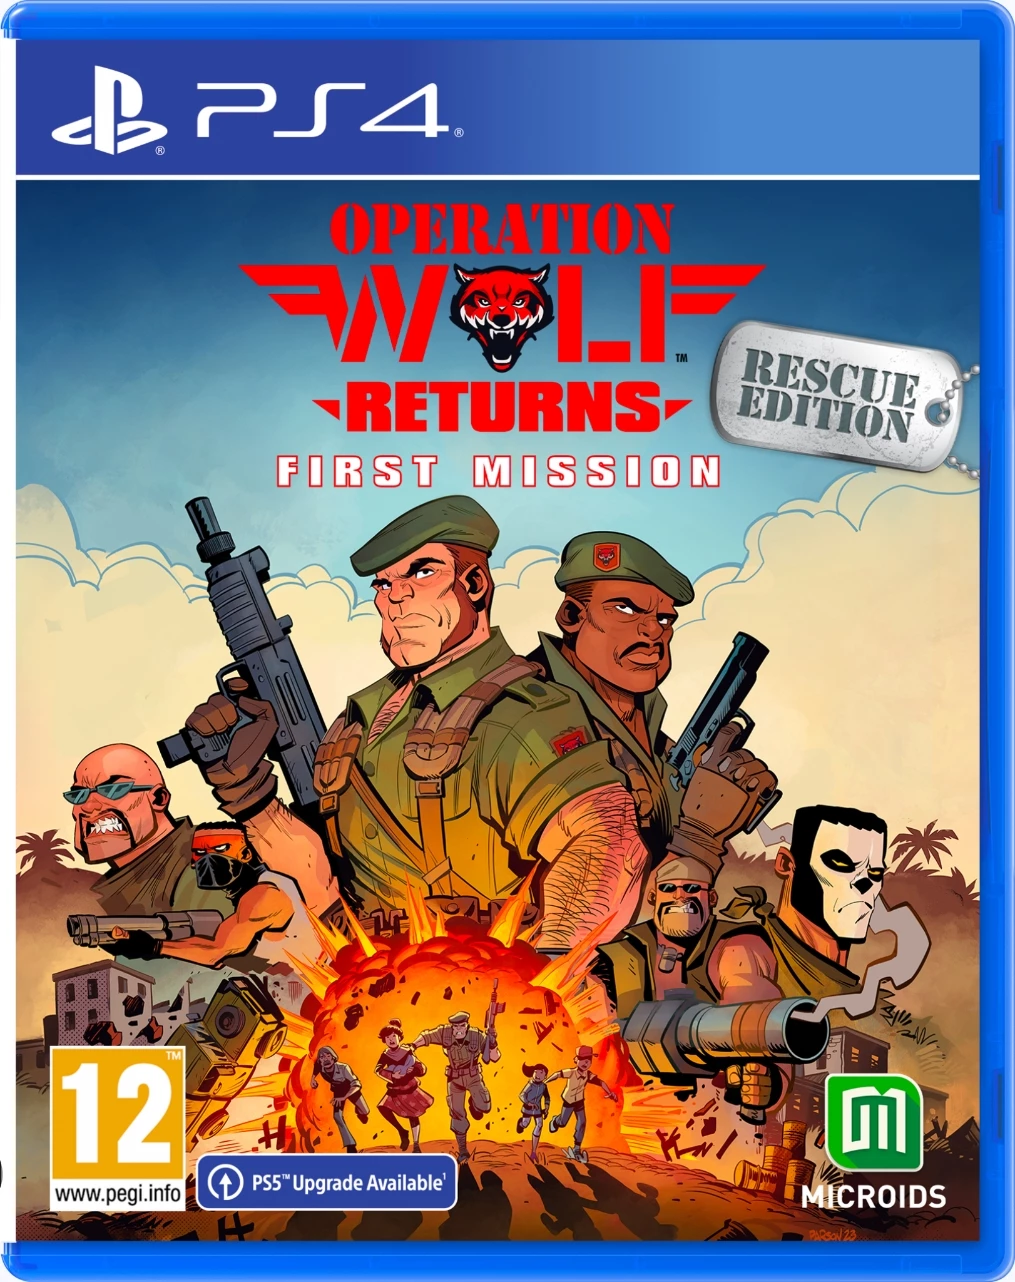 Operation Wolf Returns: First Mission - Rescue Edition (PS4), Microids